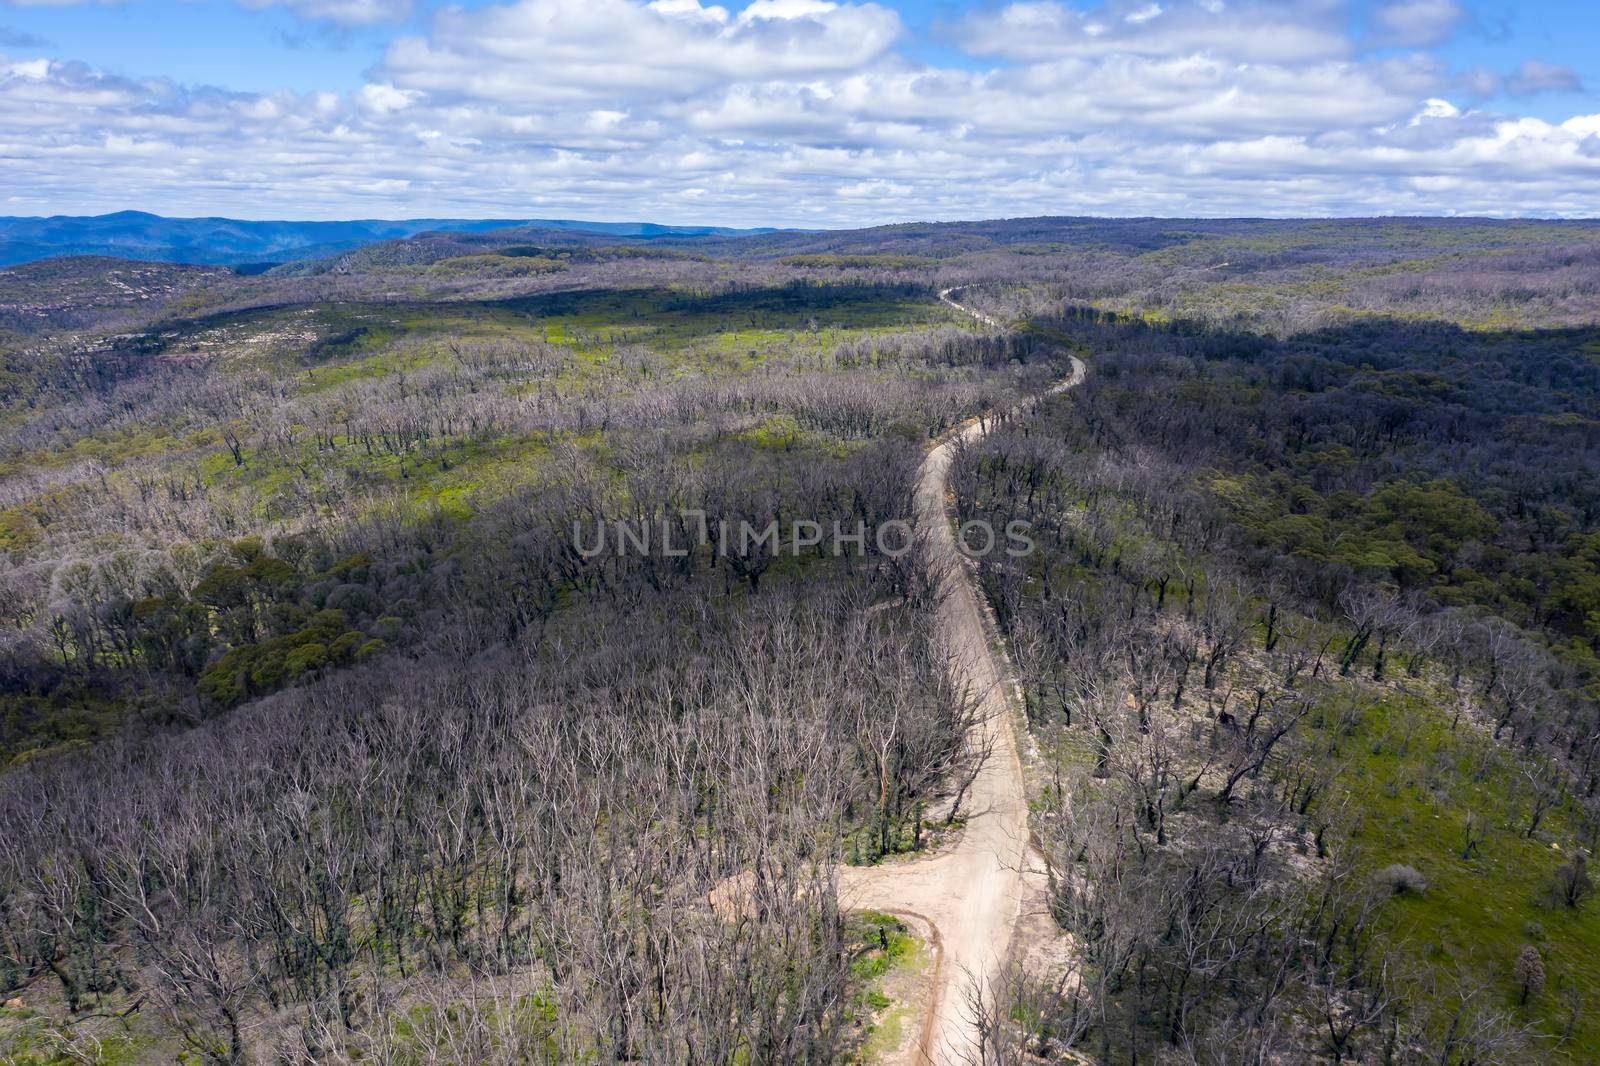 Aerial view of a dirt road in a forest regenerating from bushfire in Kanangra-Boyd National Park in the Central Tablelands in regional New South Wales Australia